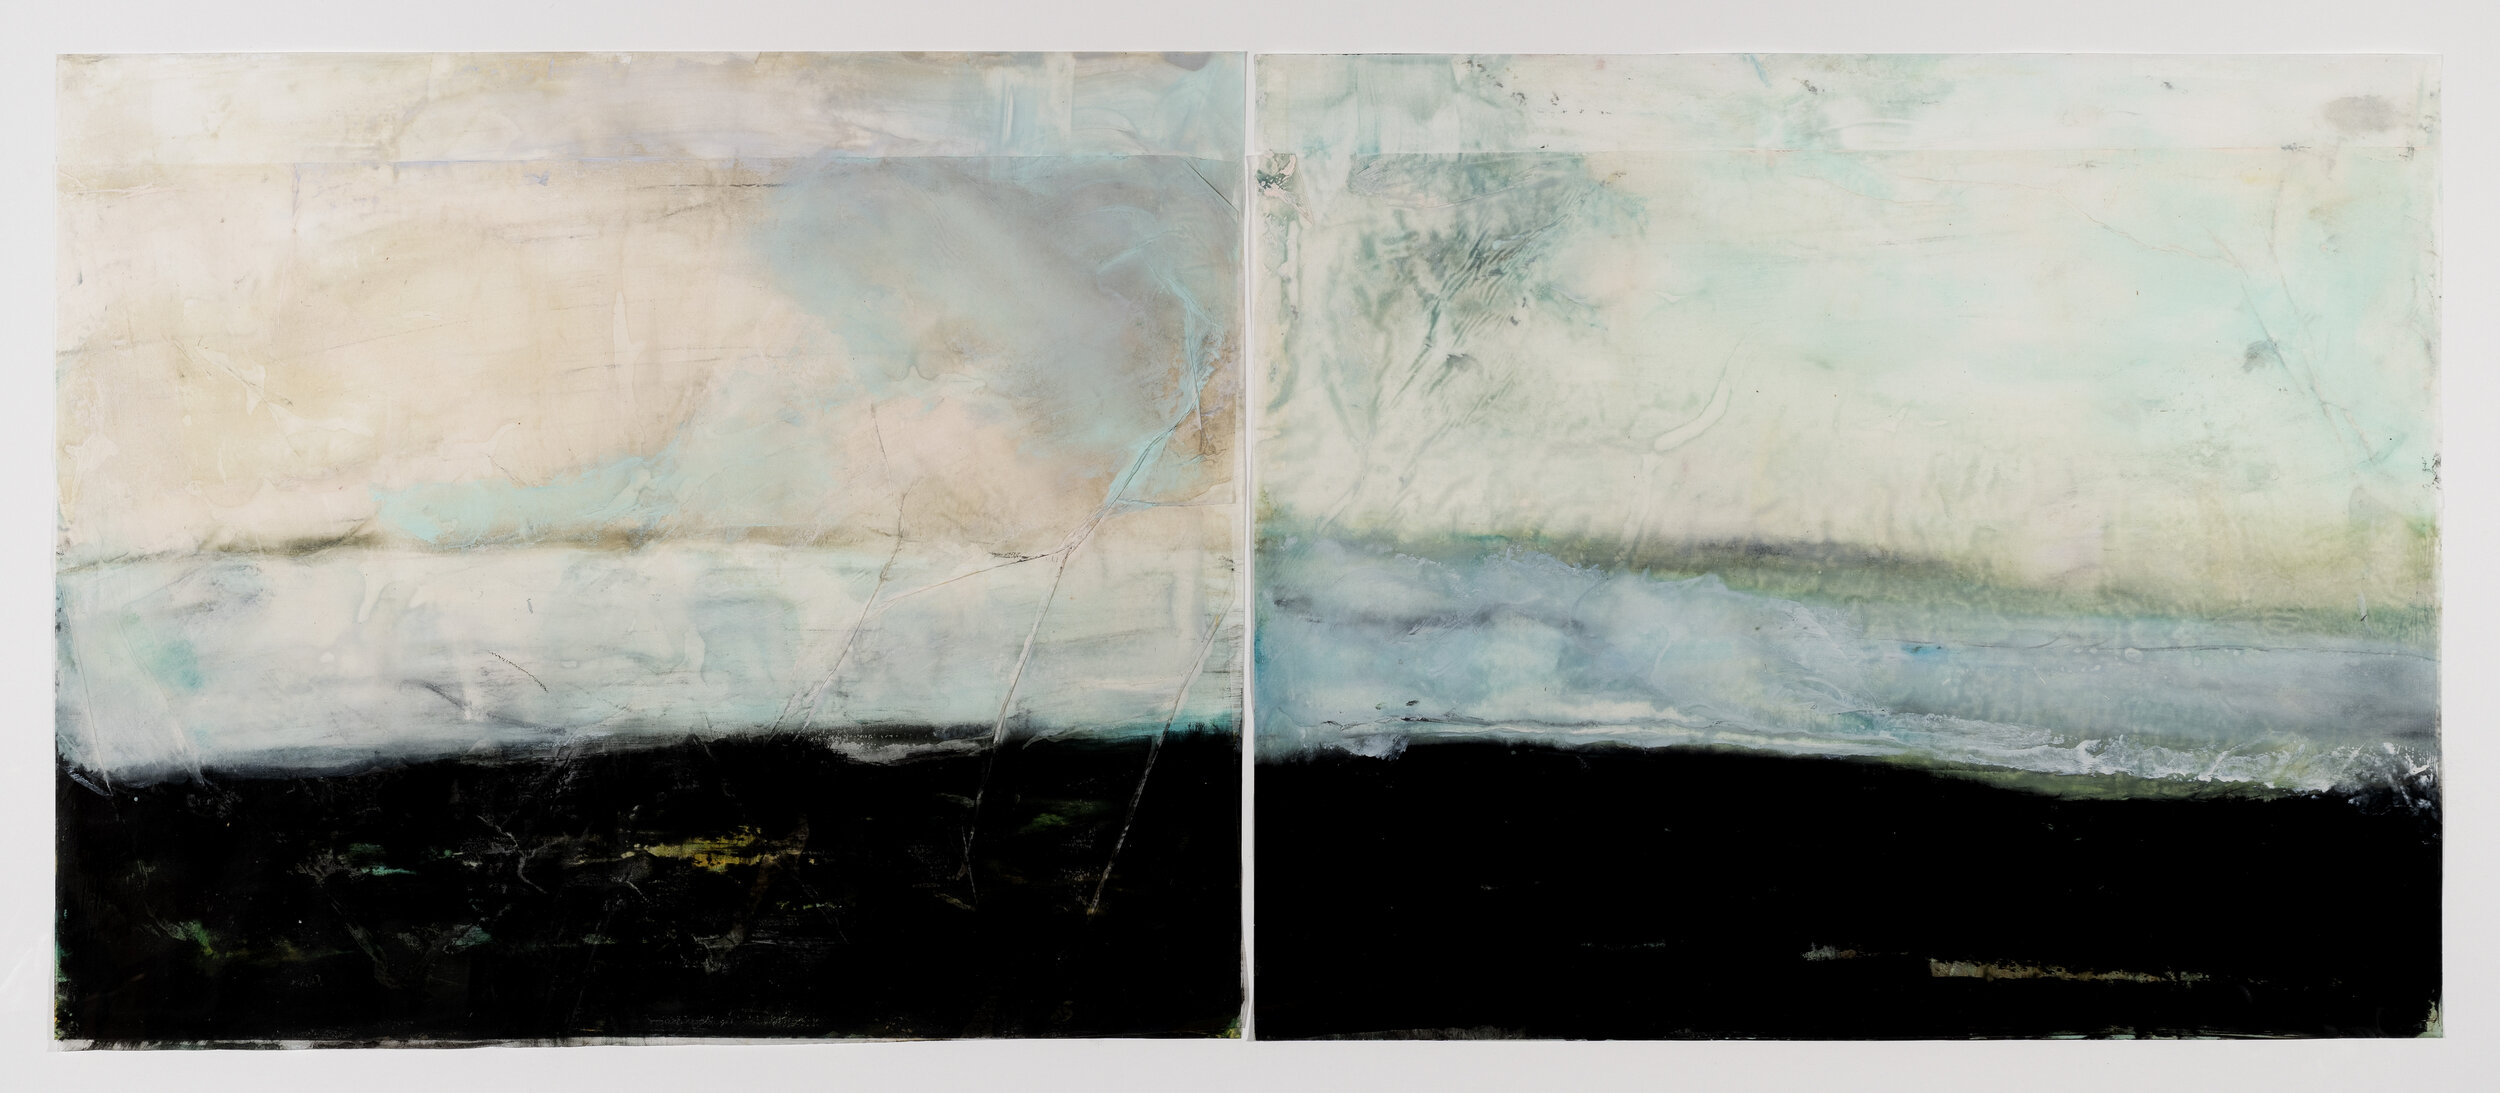 Old House Beach, 2019, diptych, encaustic wax on Japanese rice paper, 32 x 56 in, $5,000